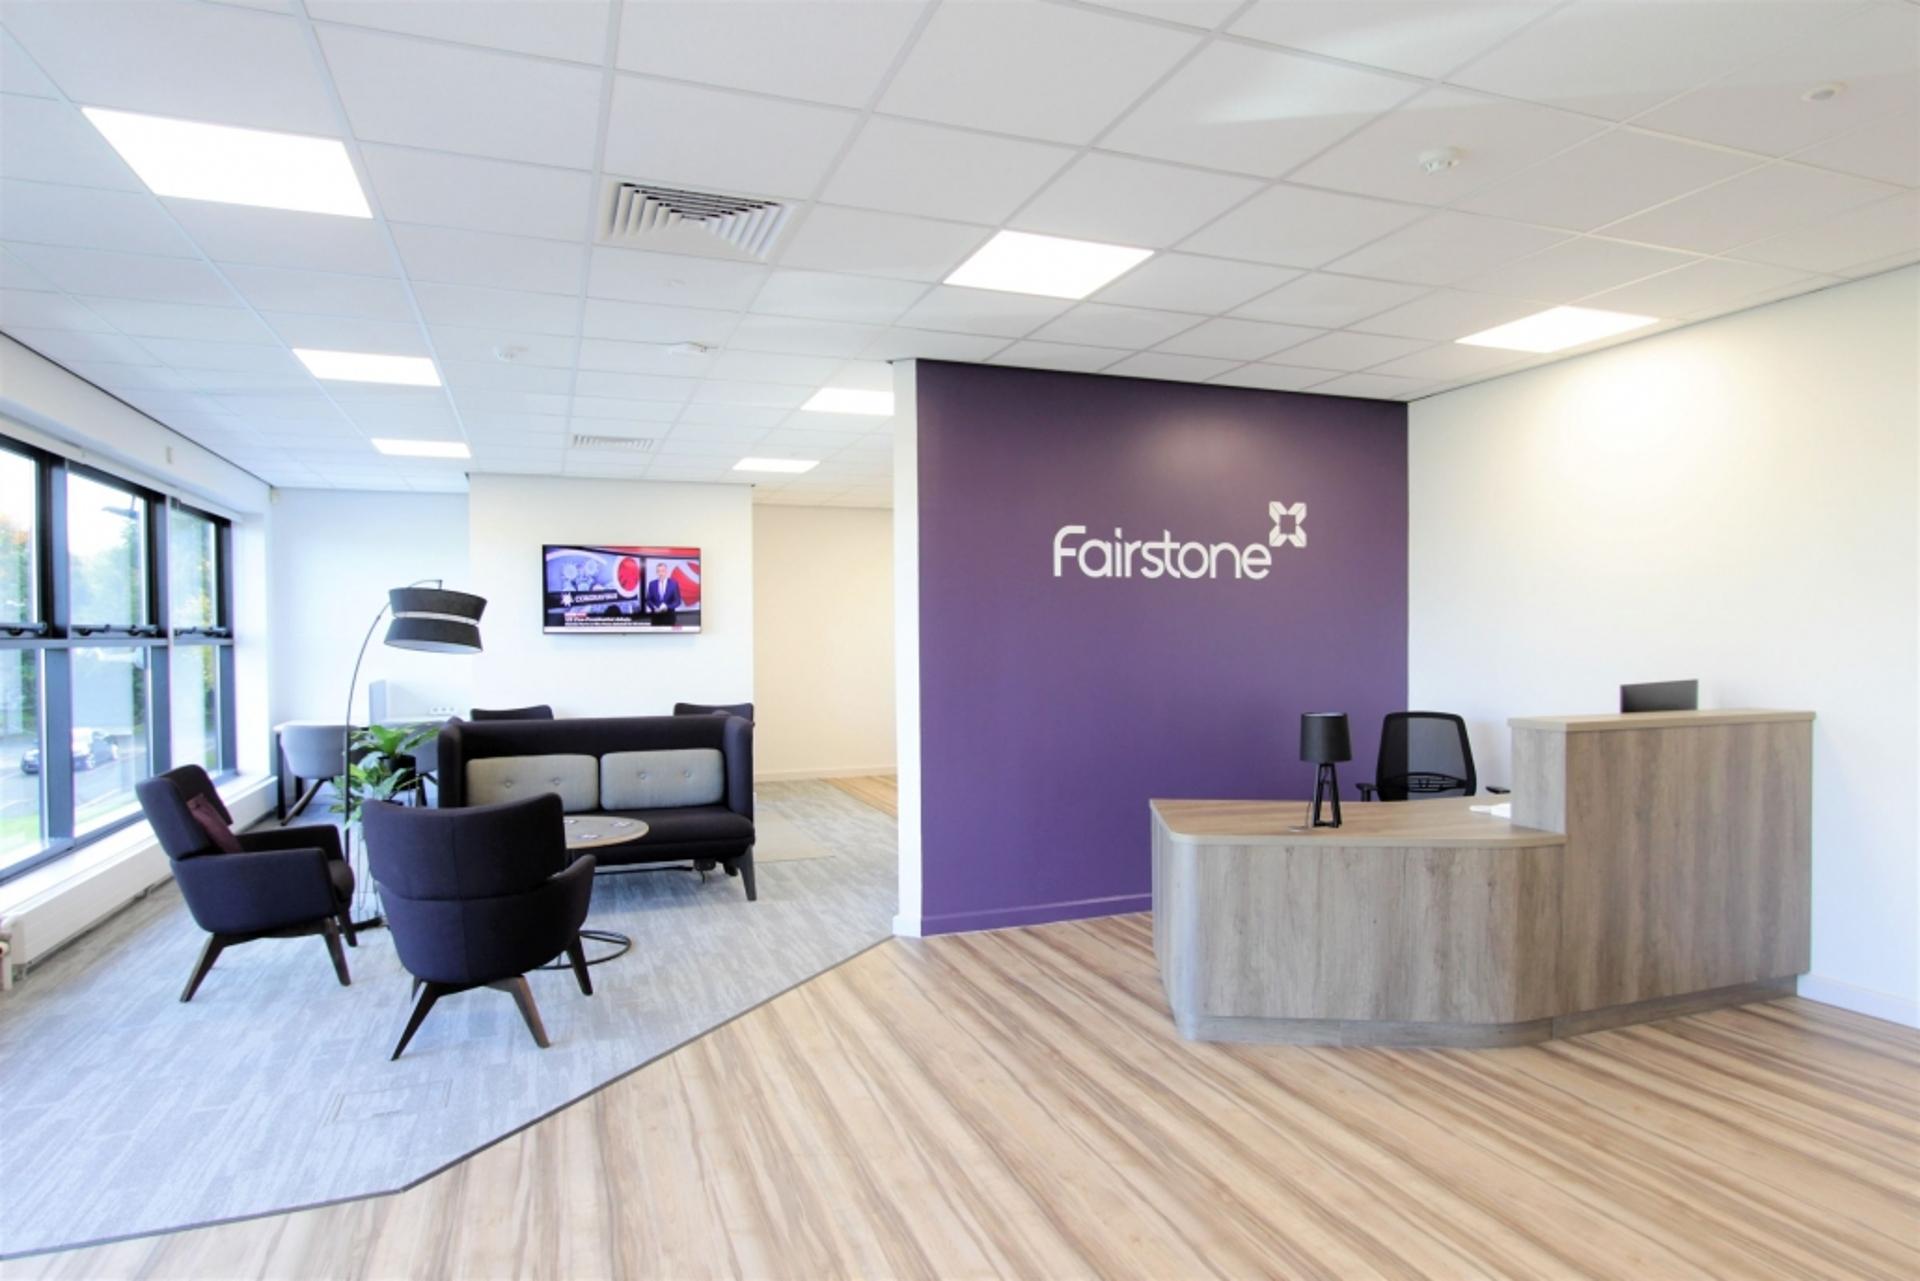 Double acquisition for Fairstone